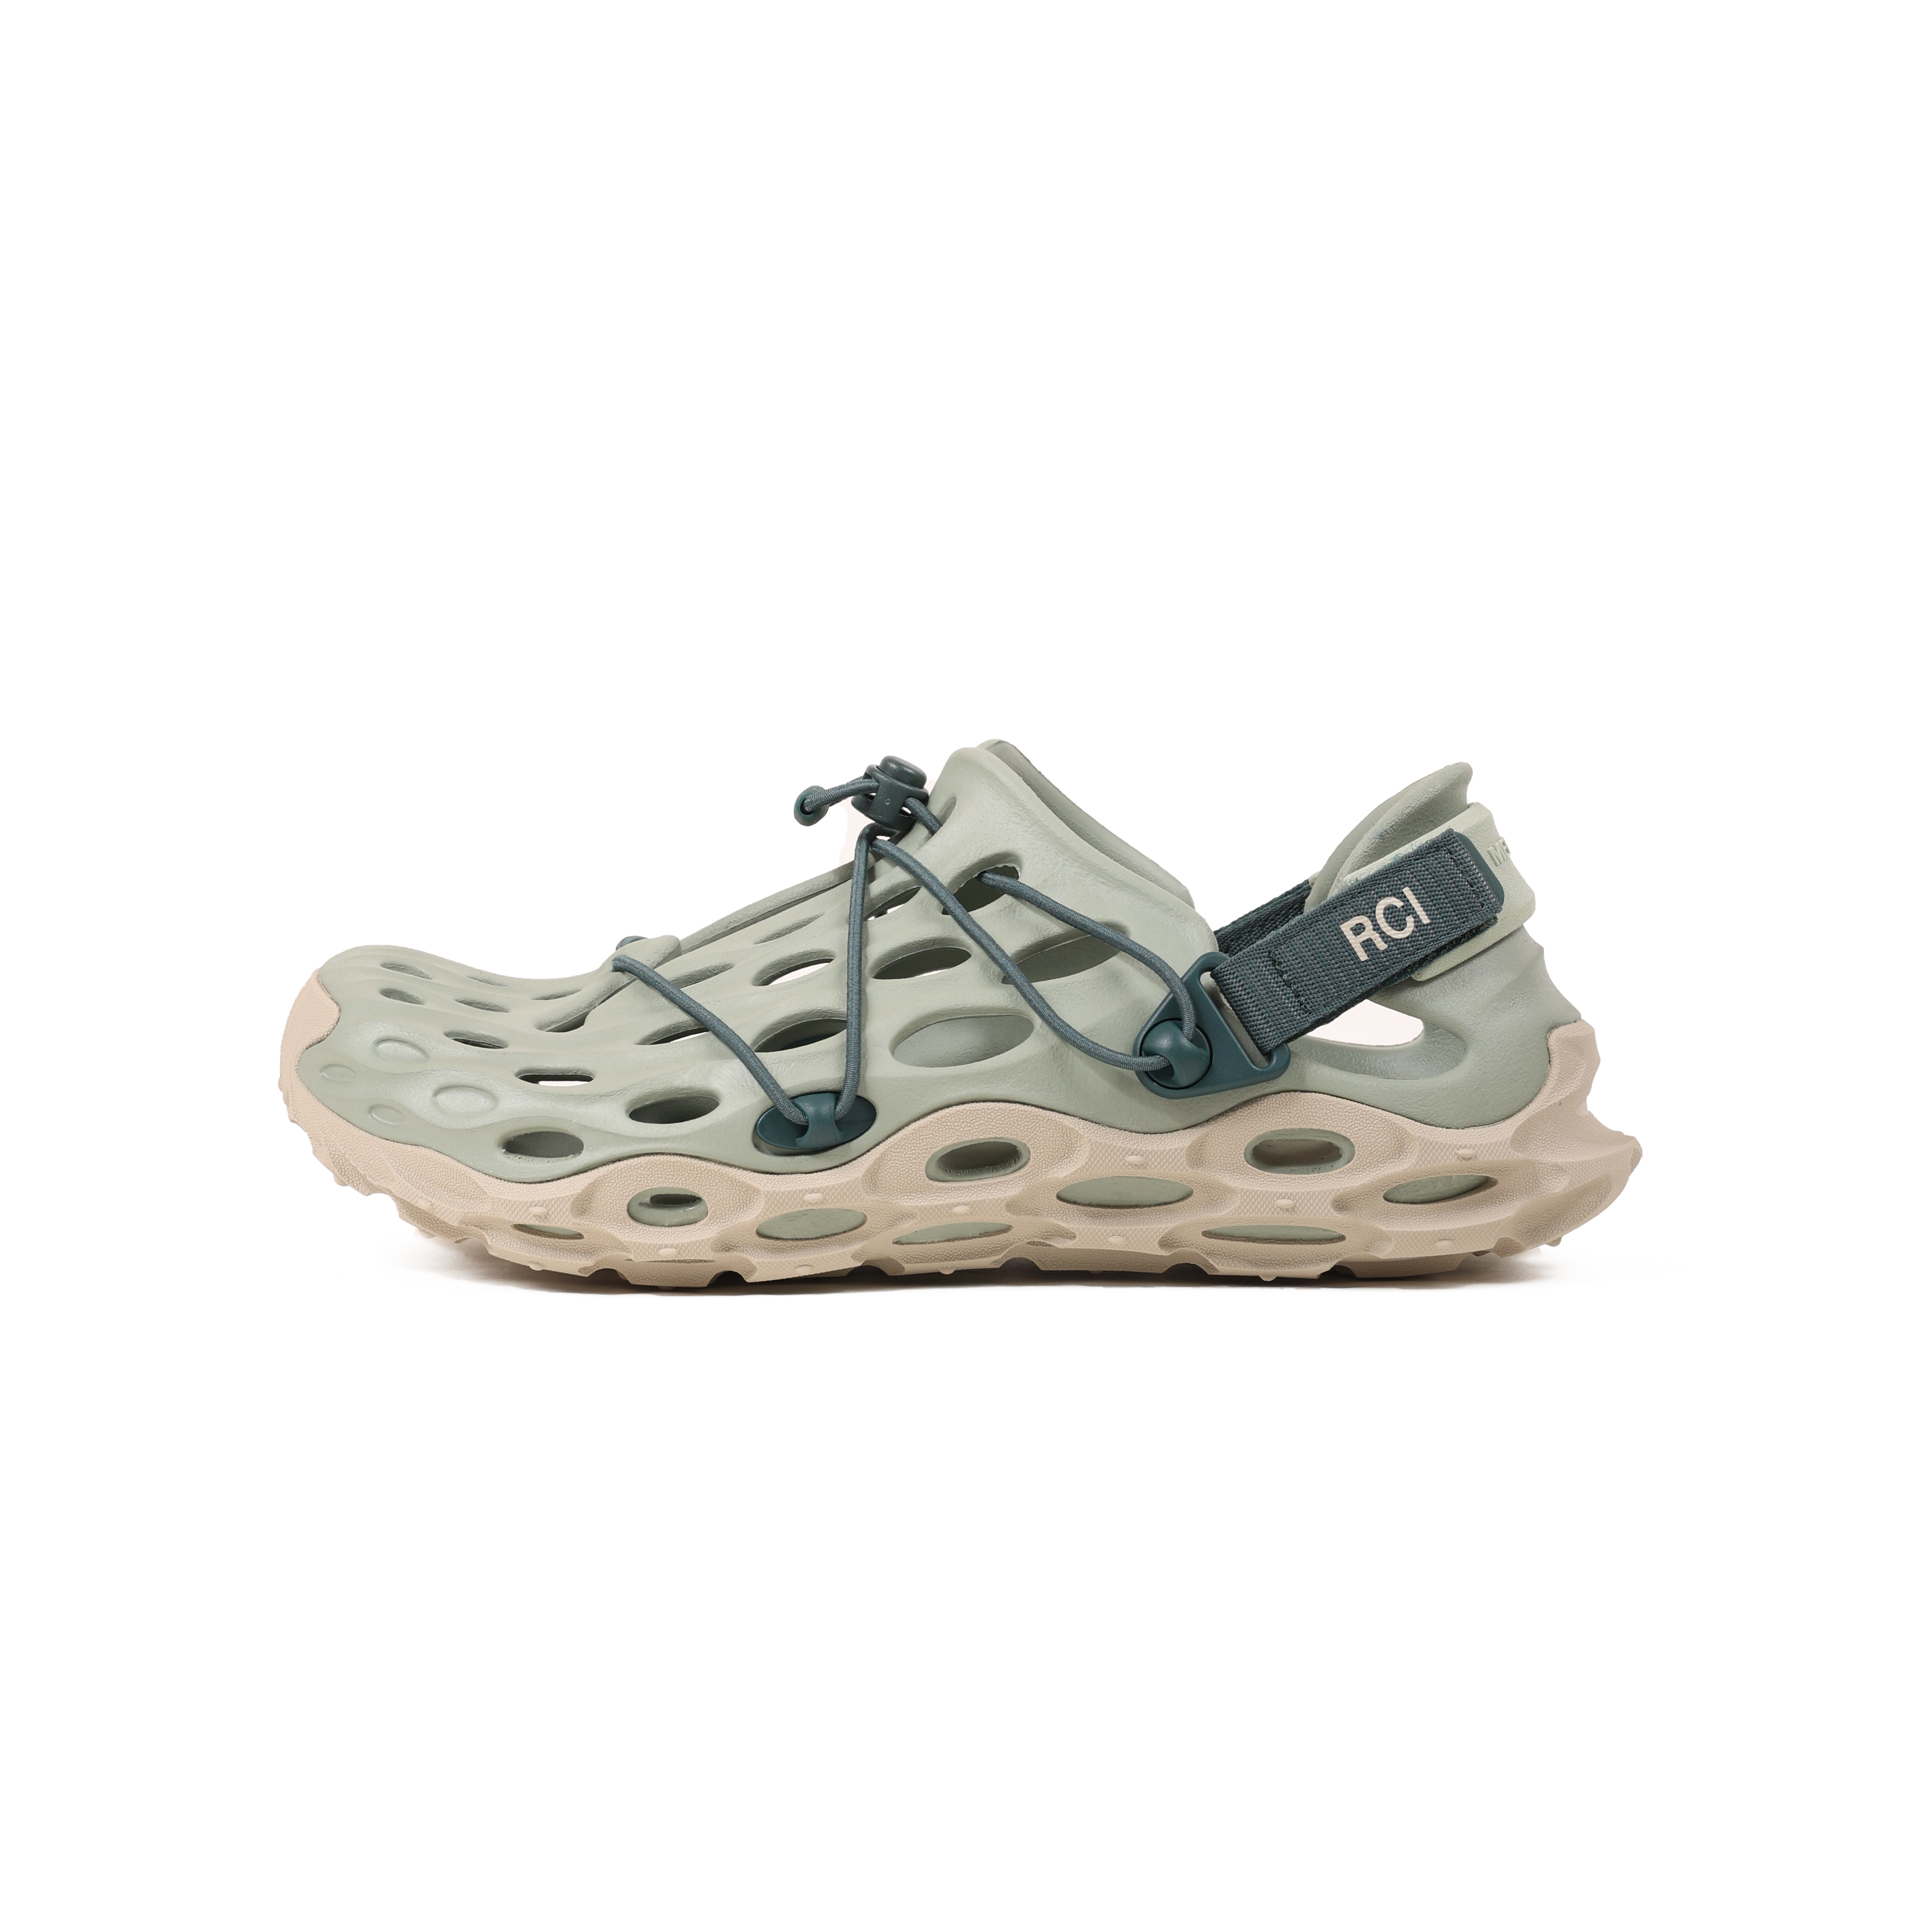 REESE COOPER x MERRELL M HYDRO MOC AT CAGE 1TRL - J0679